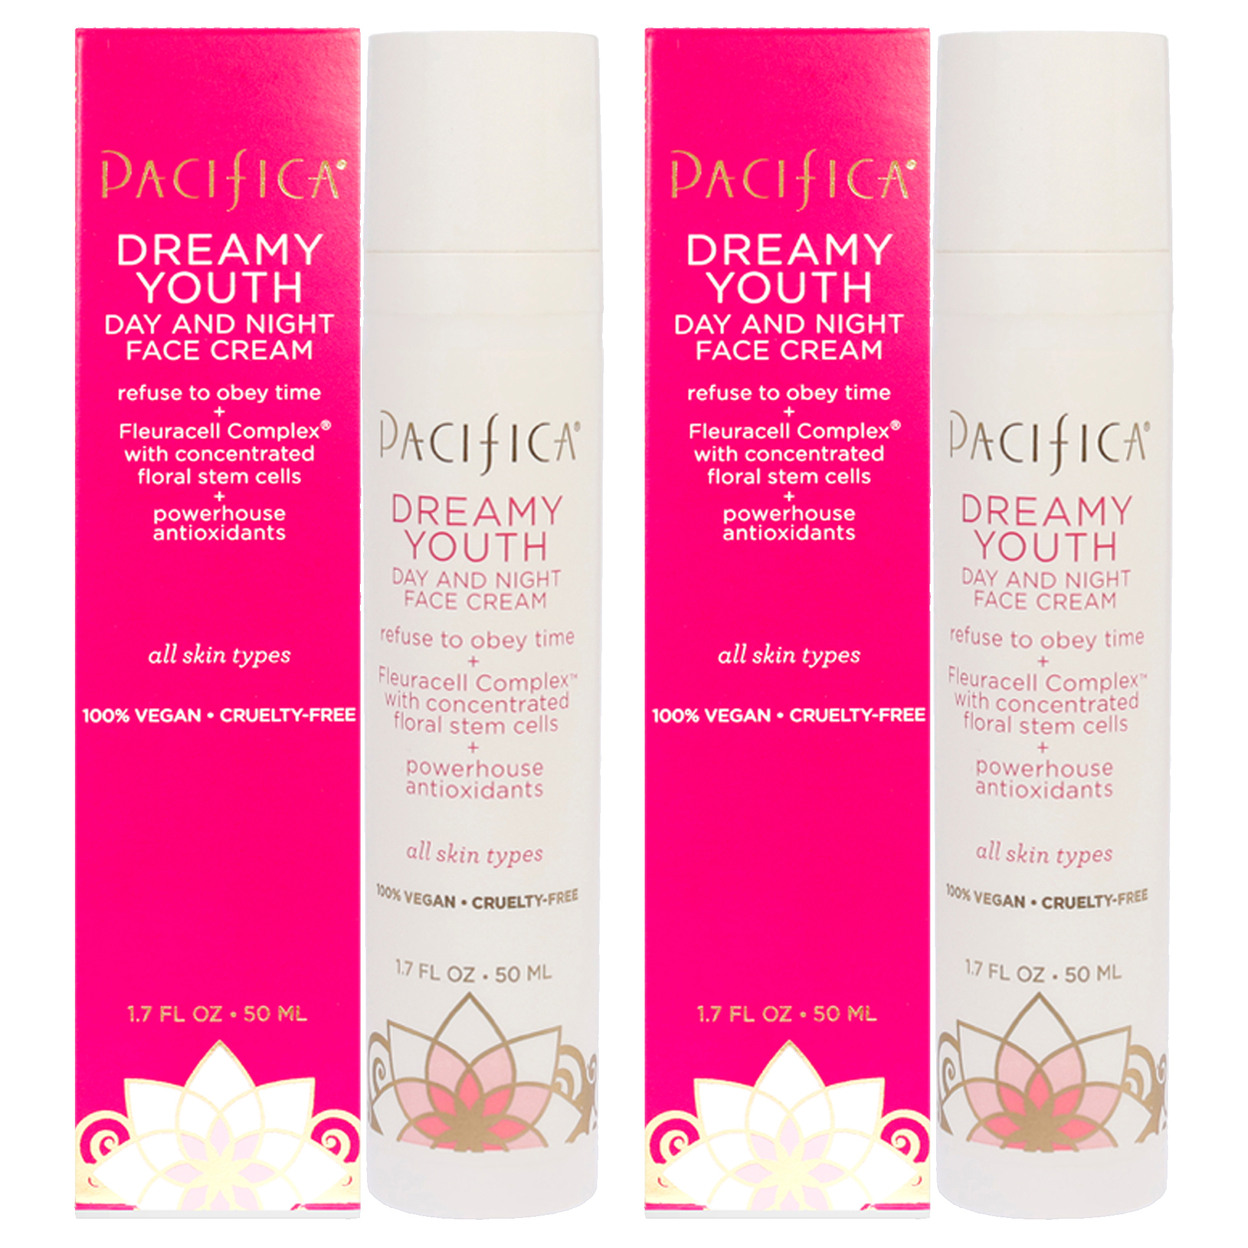 Pacifica Dreamy Youth Day And Night Face Cream - Pack Of 2 1.7 Oz